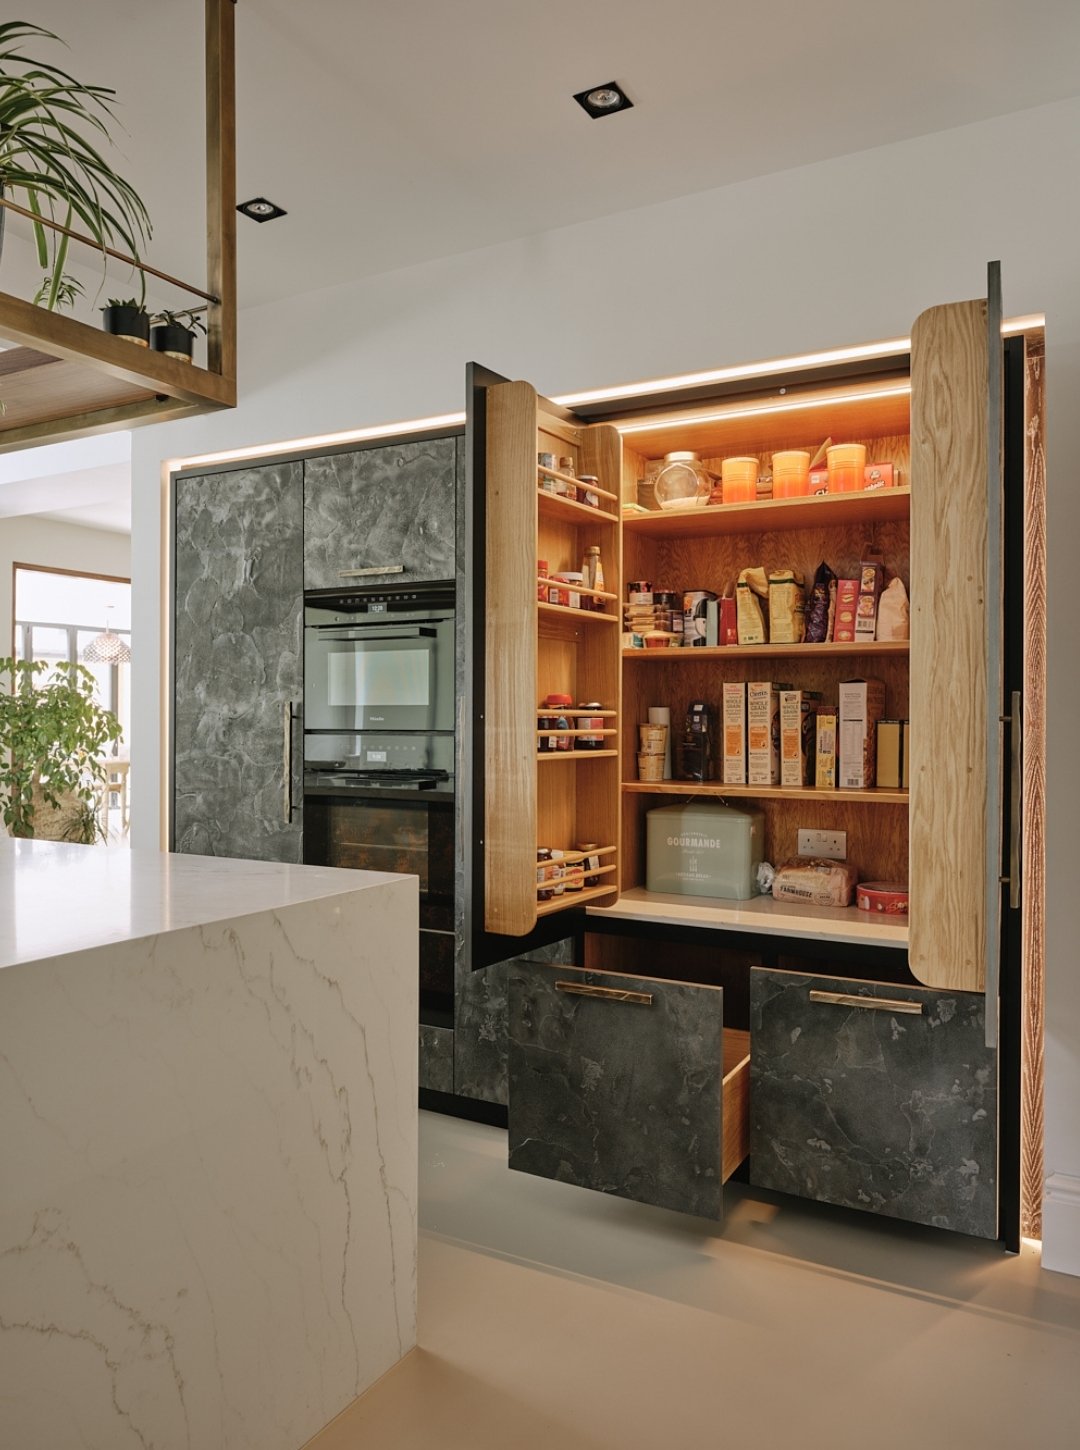 kitchen design, Charlie Smallbone’s Kitchen Mixes and Matches Materials to Beautiful Effect